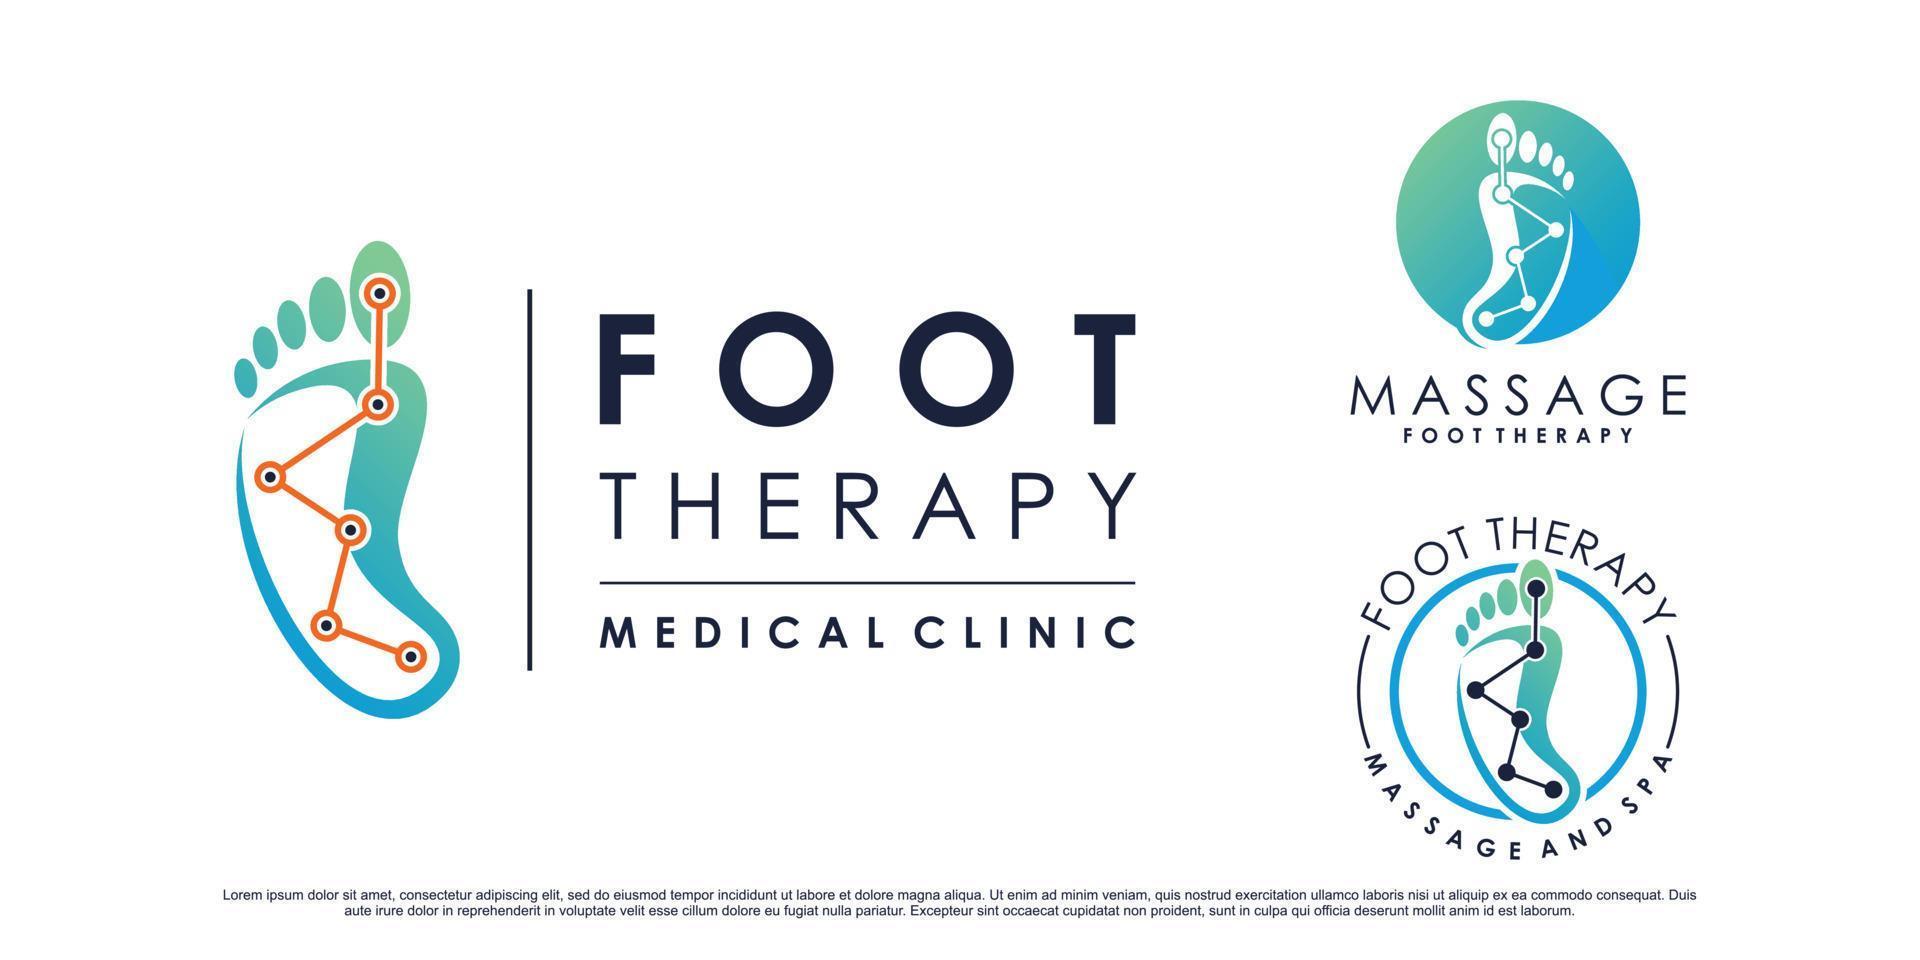 Set collection of foot therapy massage logo design with creative element Premium Vector